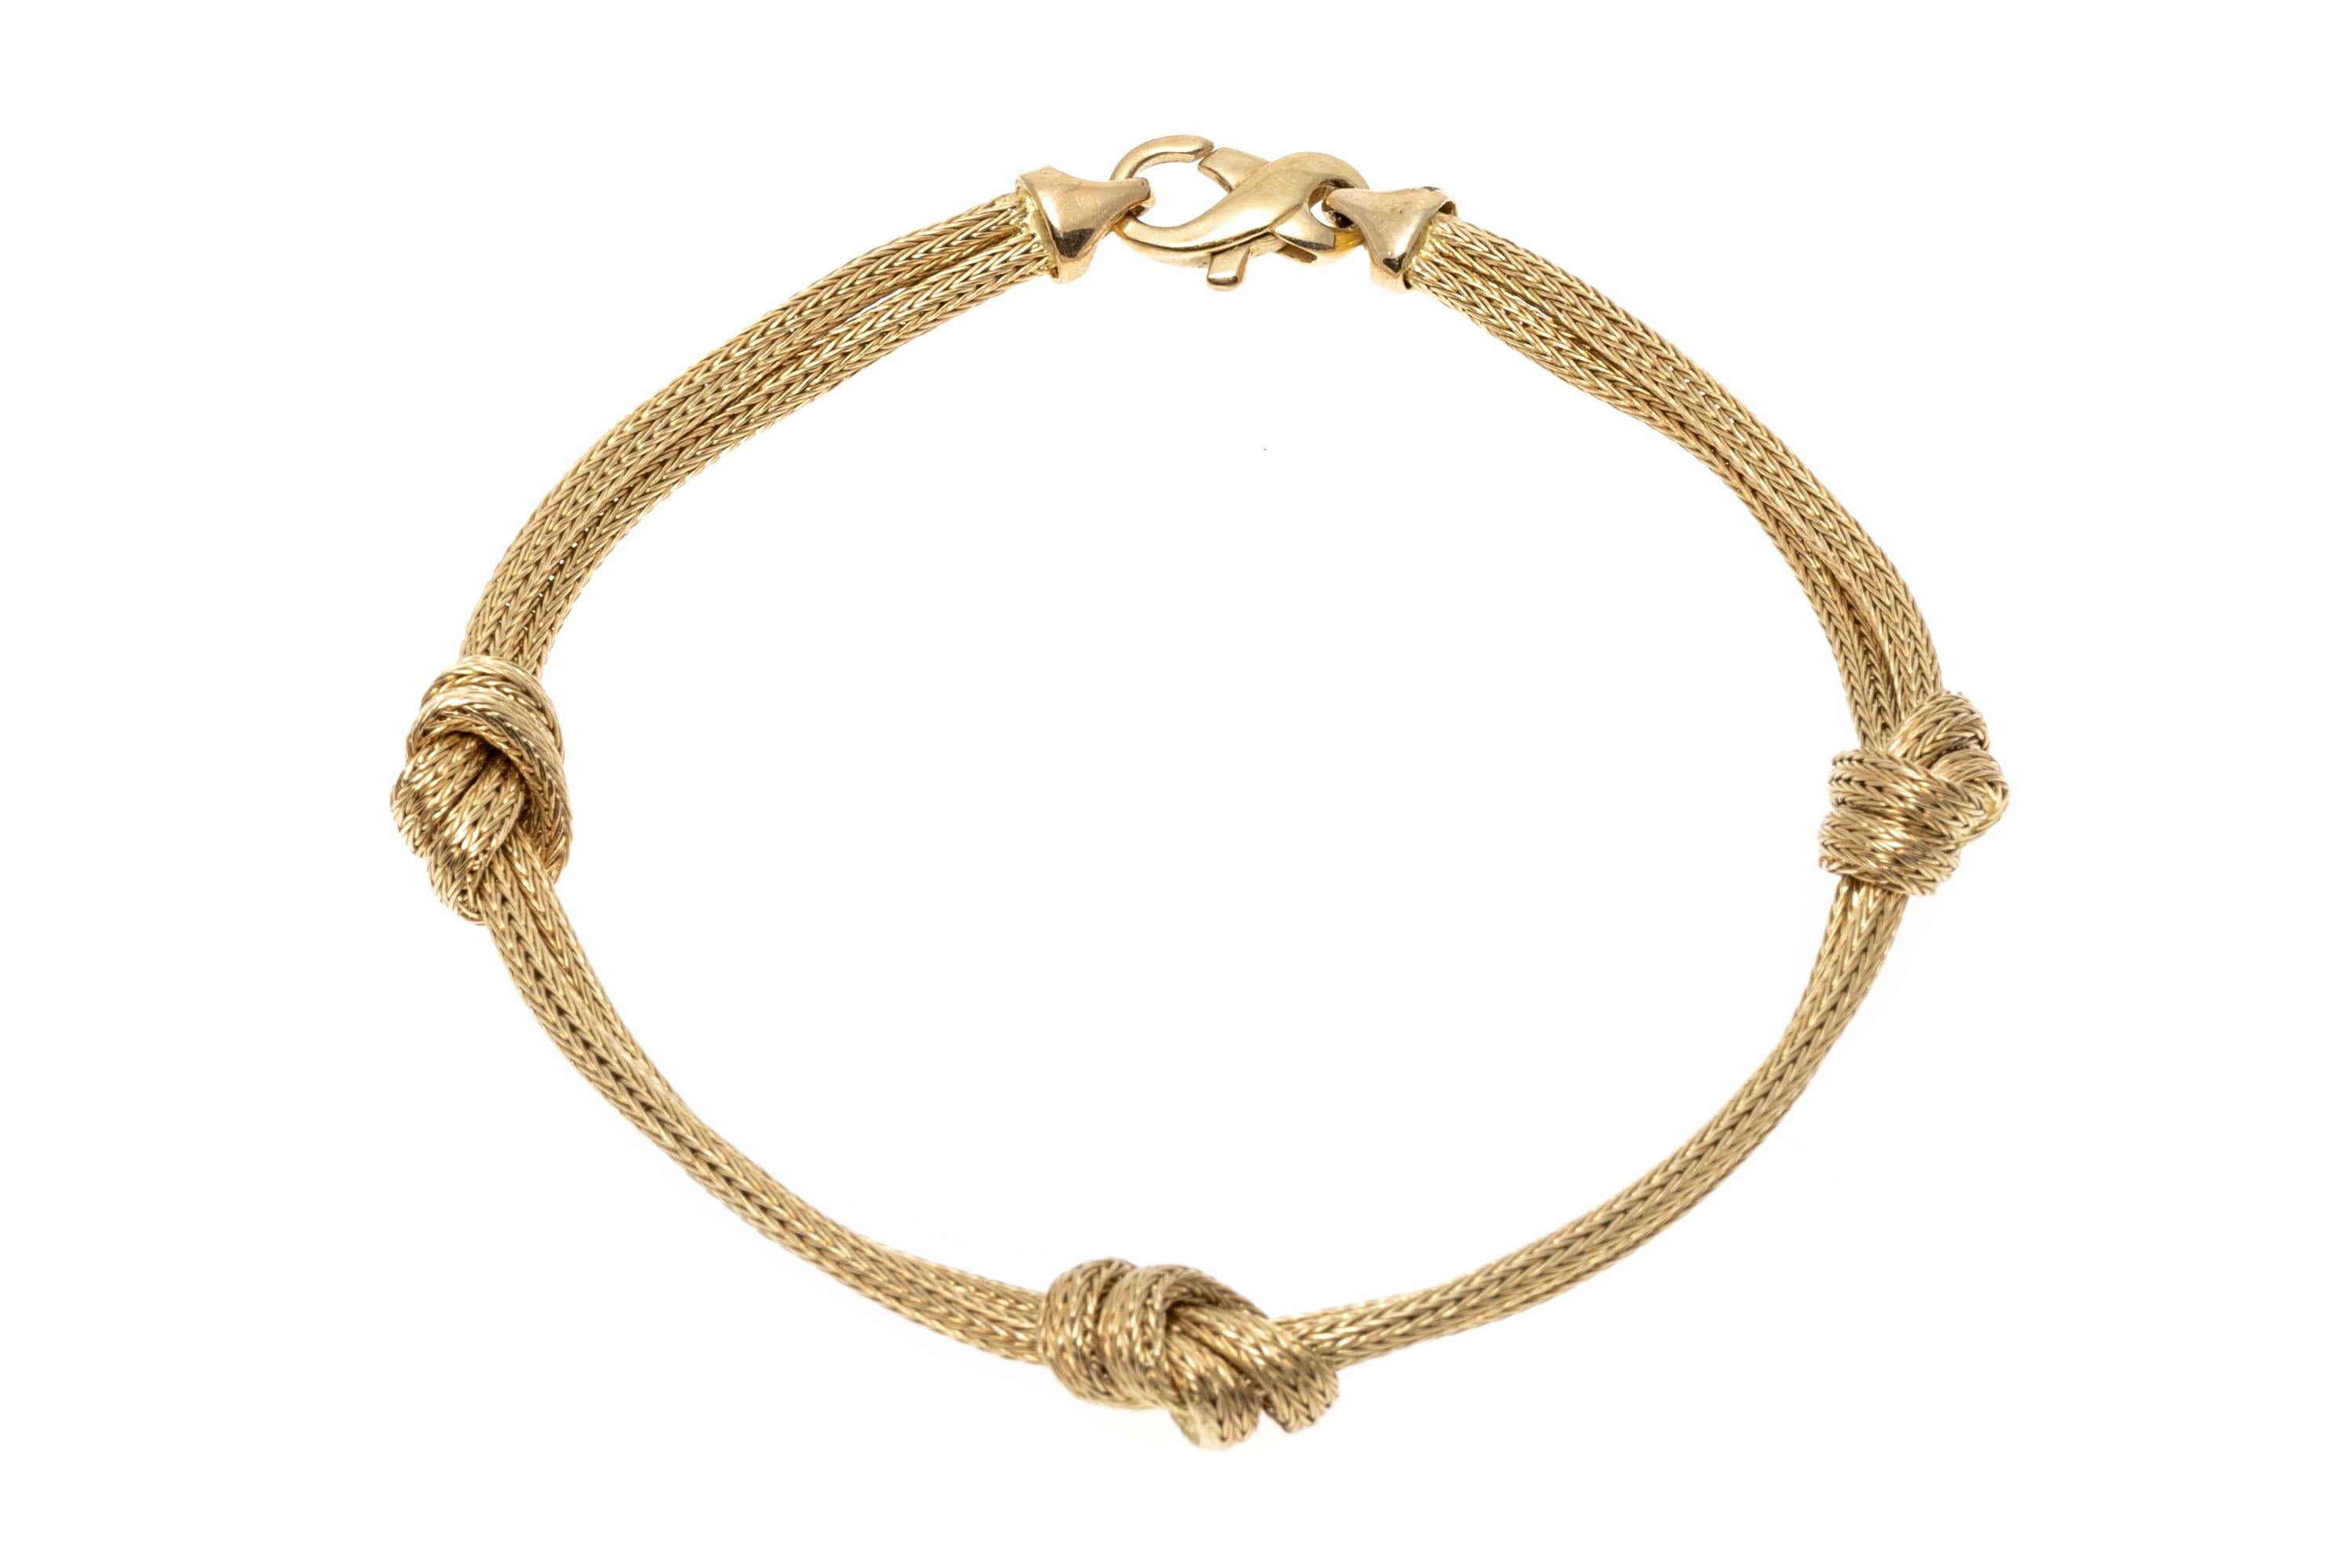 This graceful little bracelet is crafted of 14K yellow gold with two foxtail style chains. Set at intervals along the bracelet are three overhand knots. Lobster claw style clasp. 
Marks: 585 Italy
Dimensions: 7 1/4